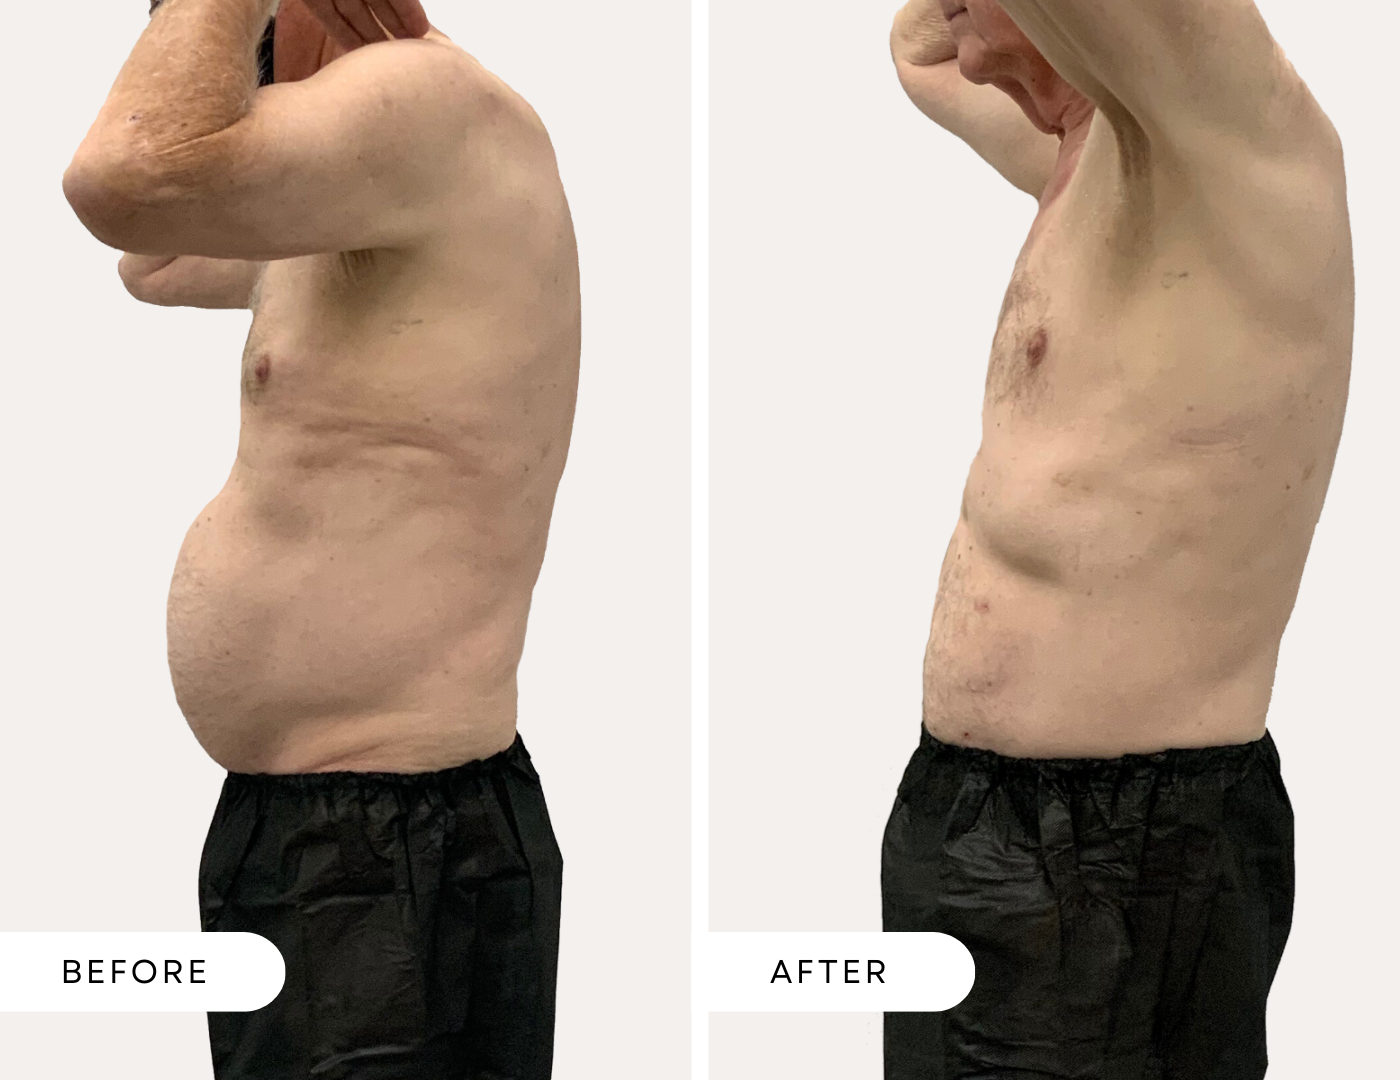 Before and after image of an older male abdomen